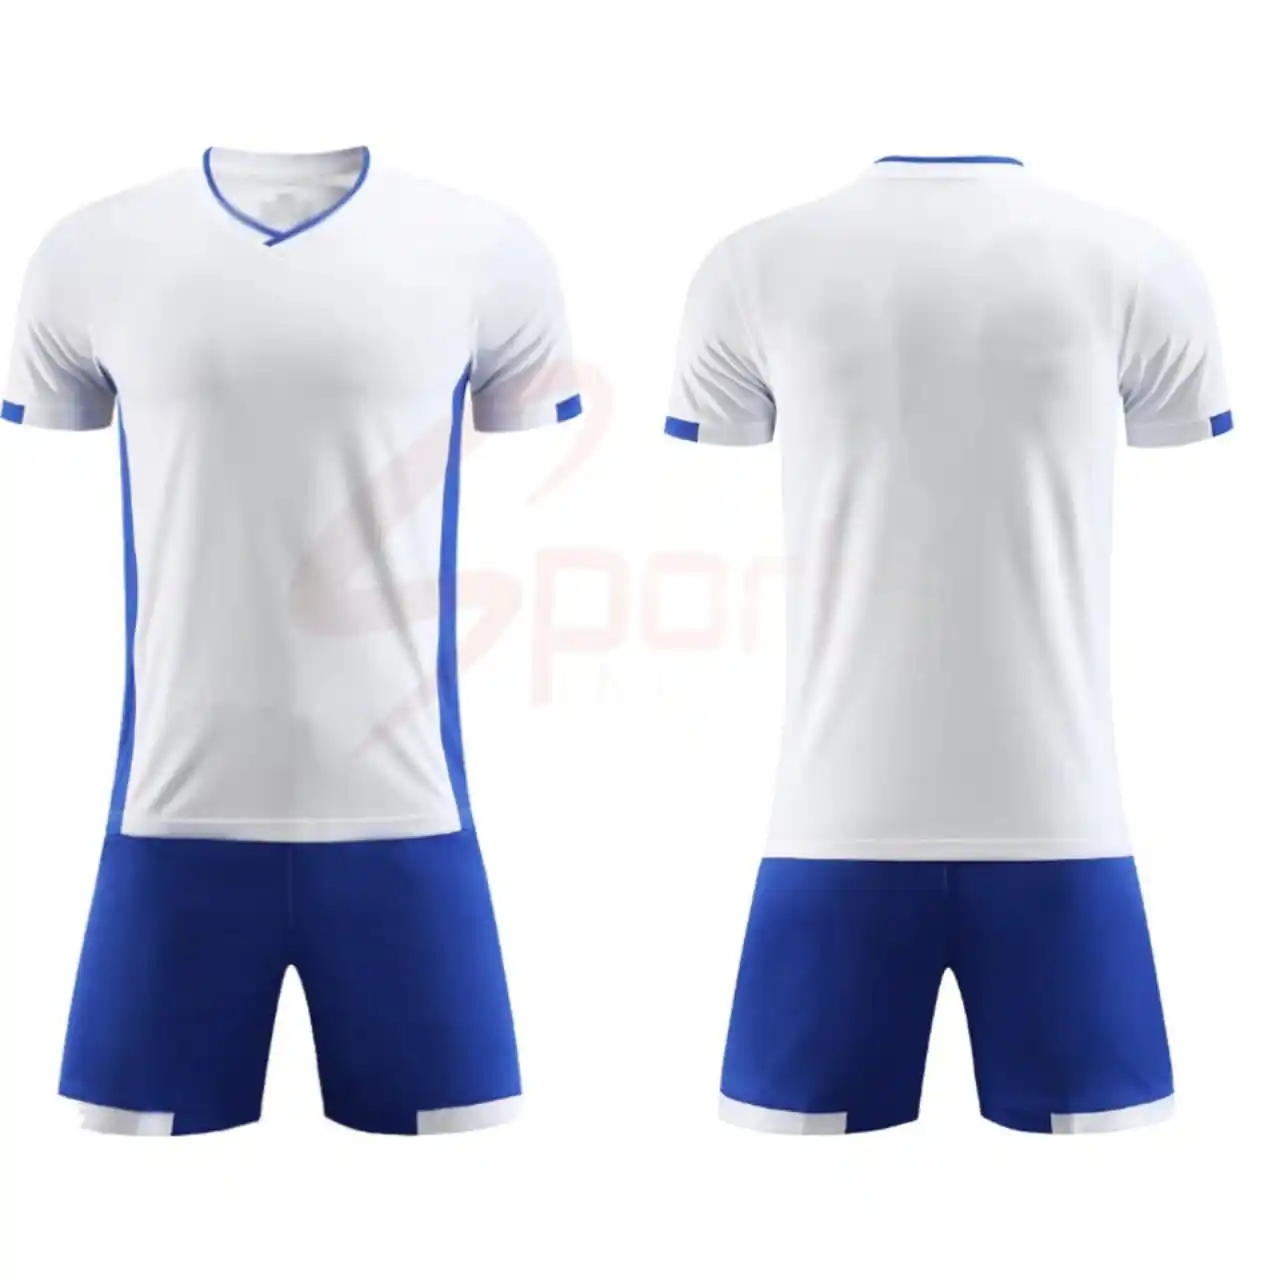 Jersey Football Soccer High Quality Cheap Soccer Uniforms Quick Dry Fabric Soccer Wear Custom Design Made In Pakistan